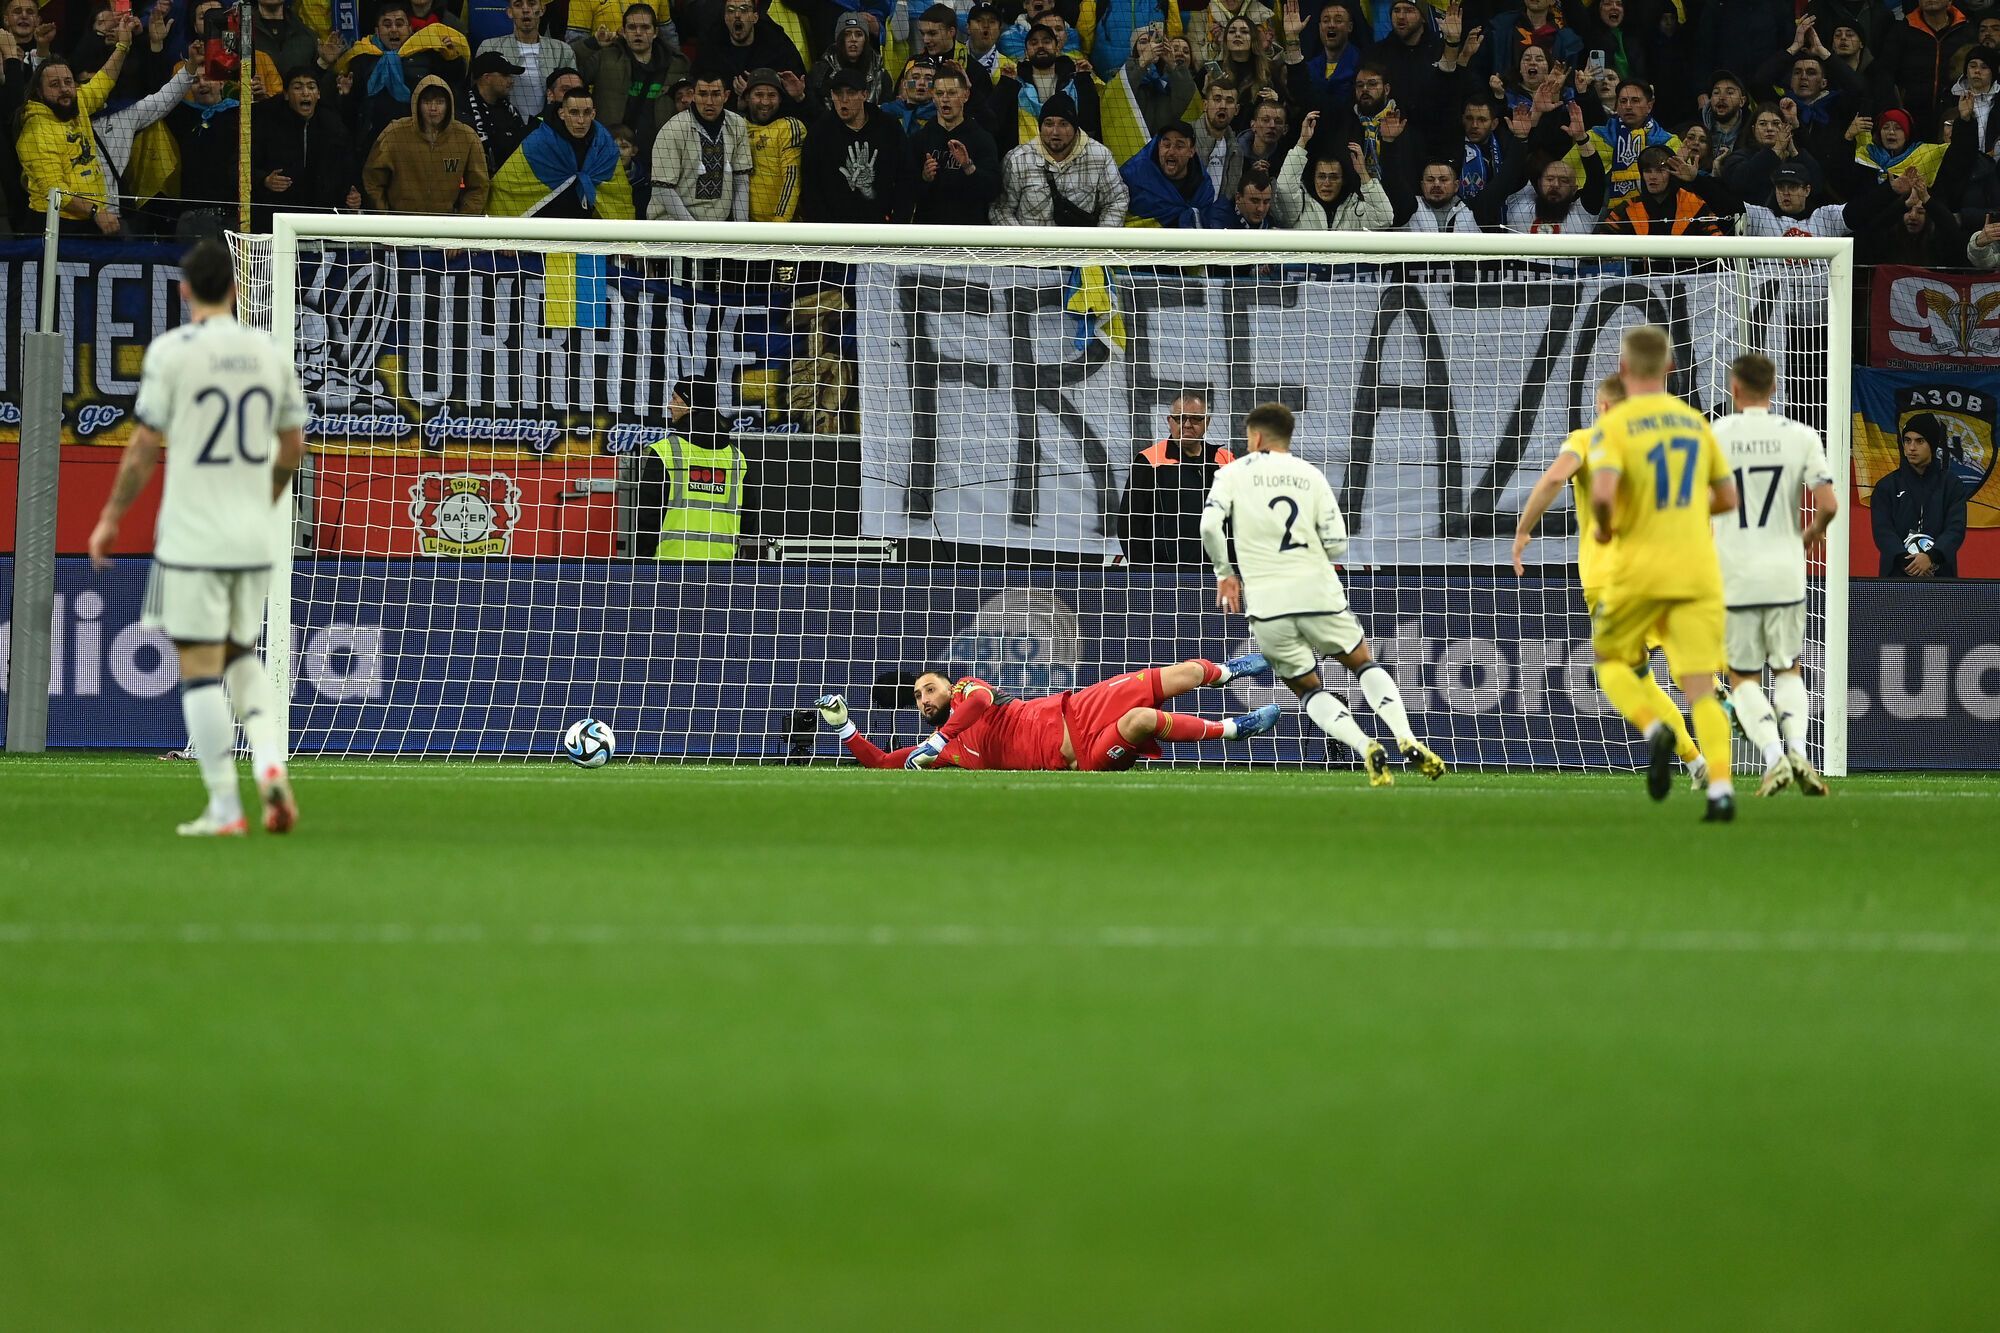 ''I would have gone crazy'': former Italy star speaks out about the penalty scandal in the match with Ukraine